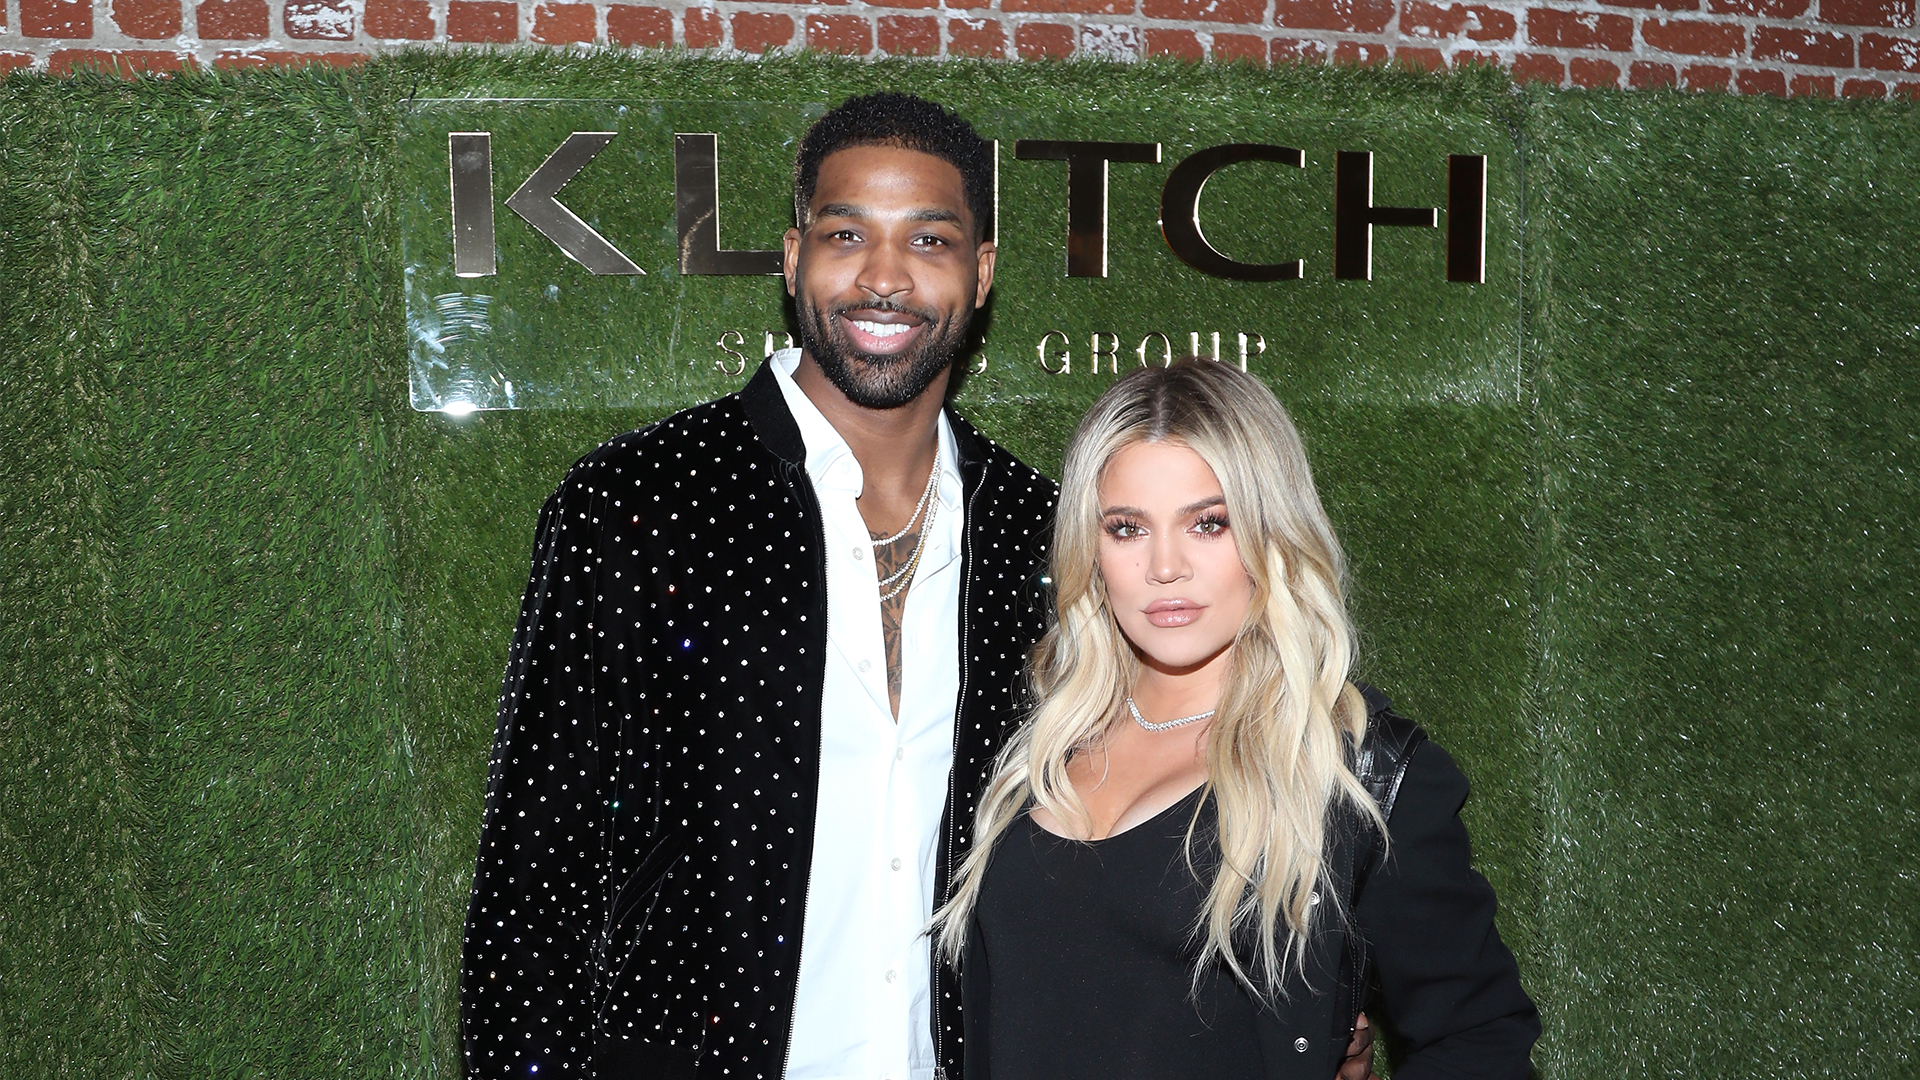 Khloé Kardashian Responds to Fan Asking If Kylie Jenner and Jordyn Woods Can Be Friends Again